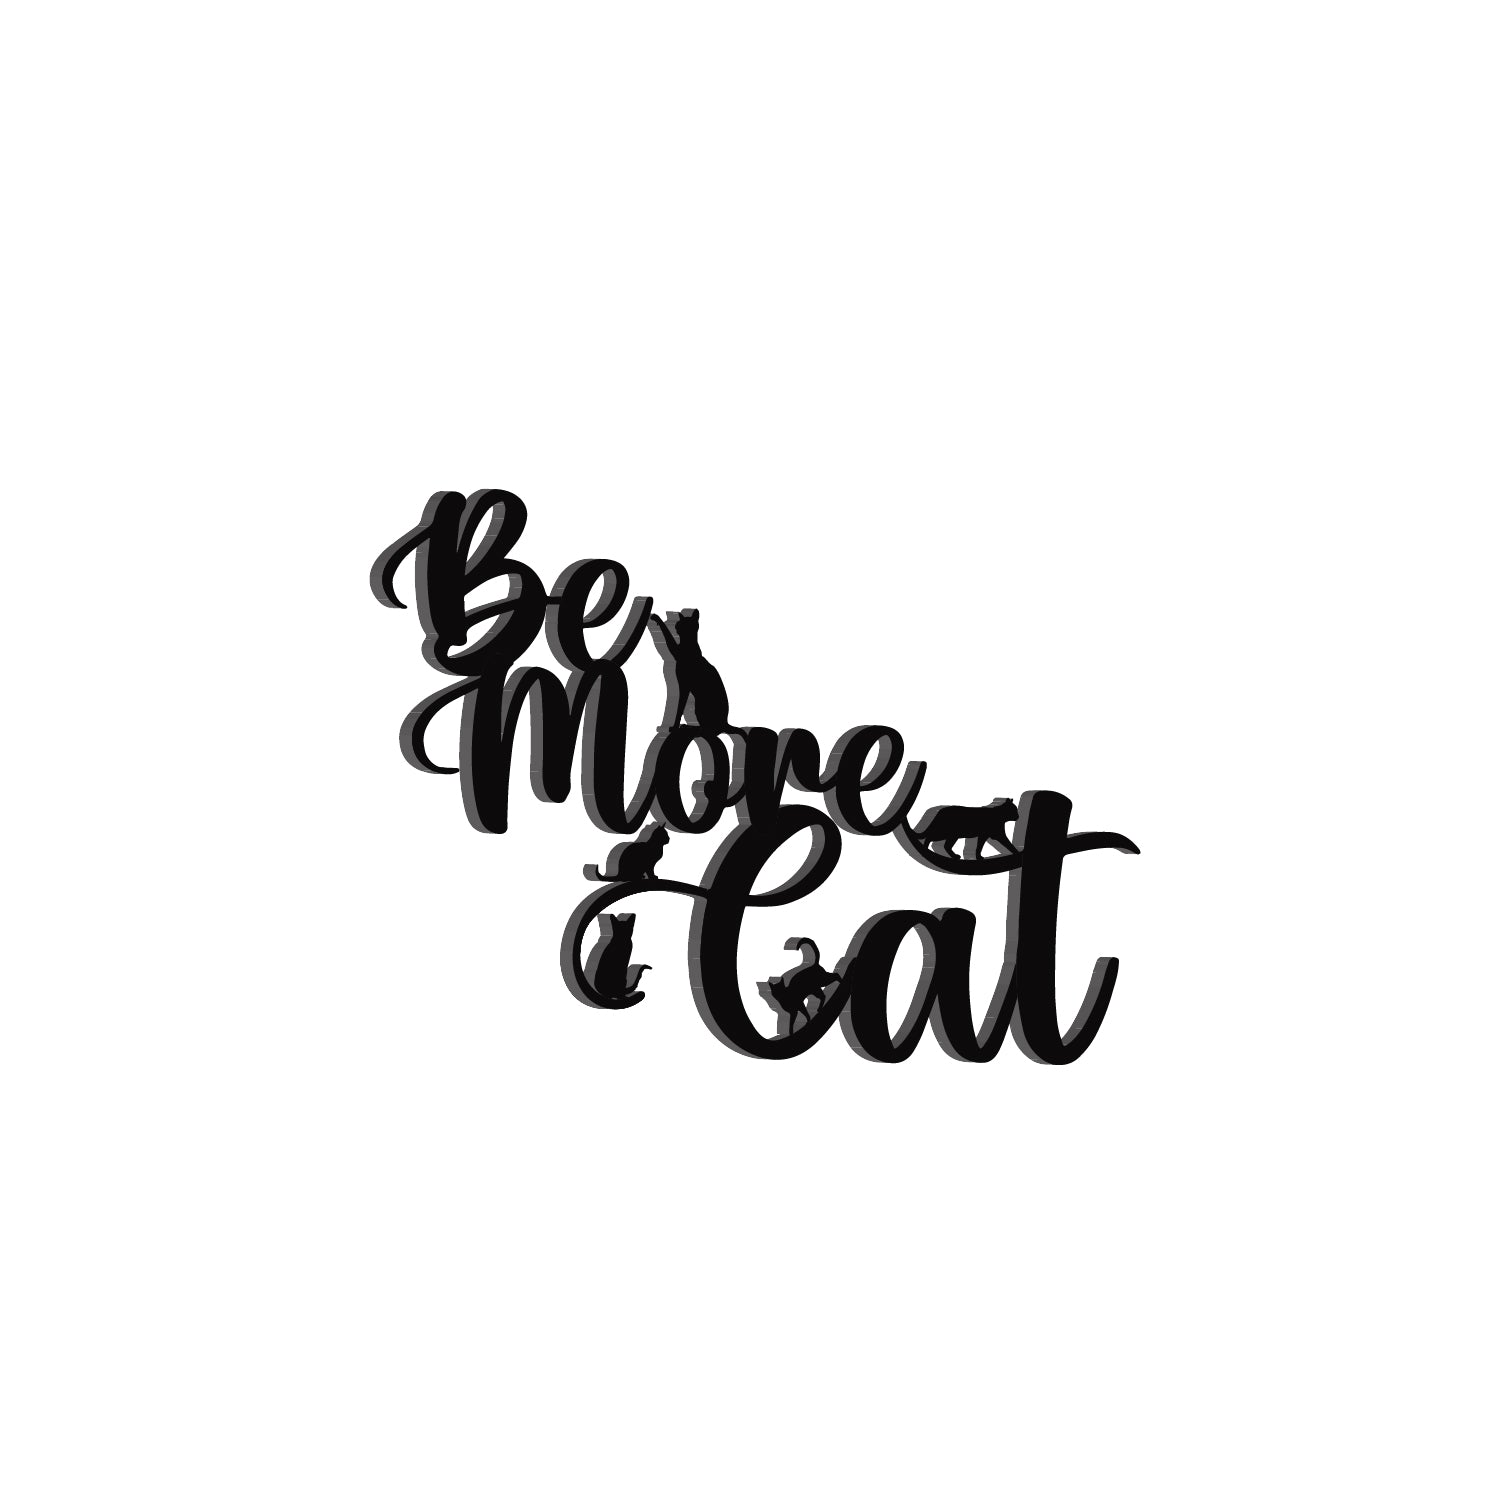 "Be More Cat" Black Engineered Wood Wall Art Cutout, Ready to Hang Home Decor 1